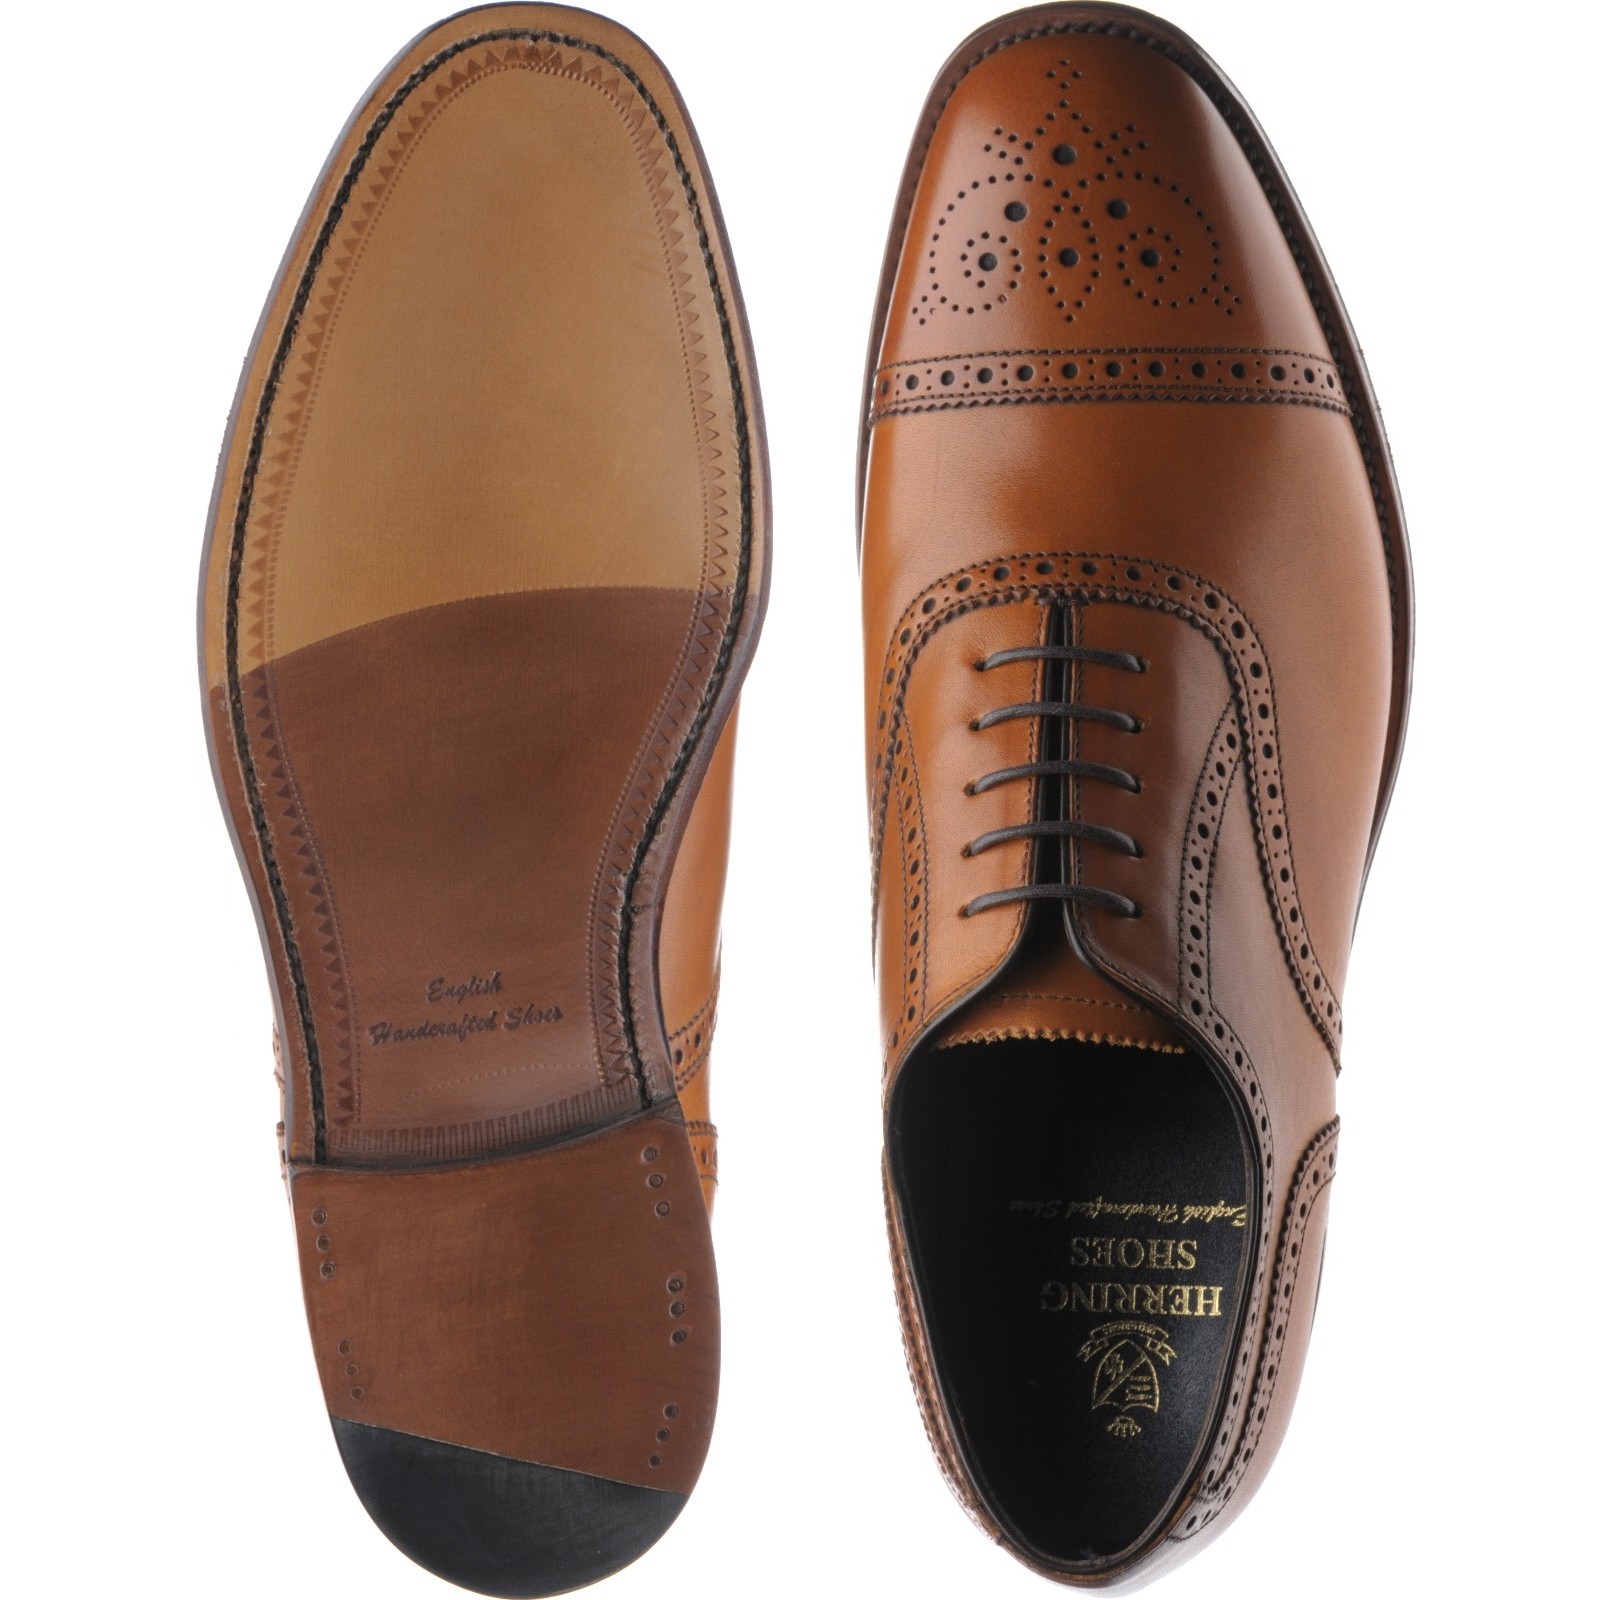 Herring shoes | Herring Classic | Hampstead in Chestnut Burnished Calf ...